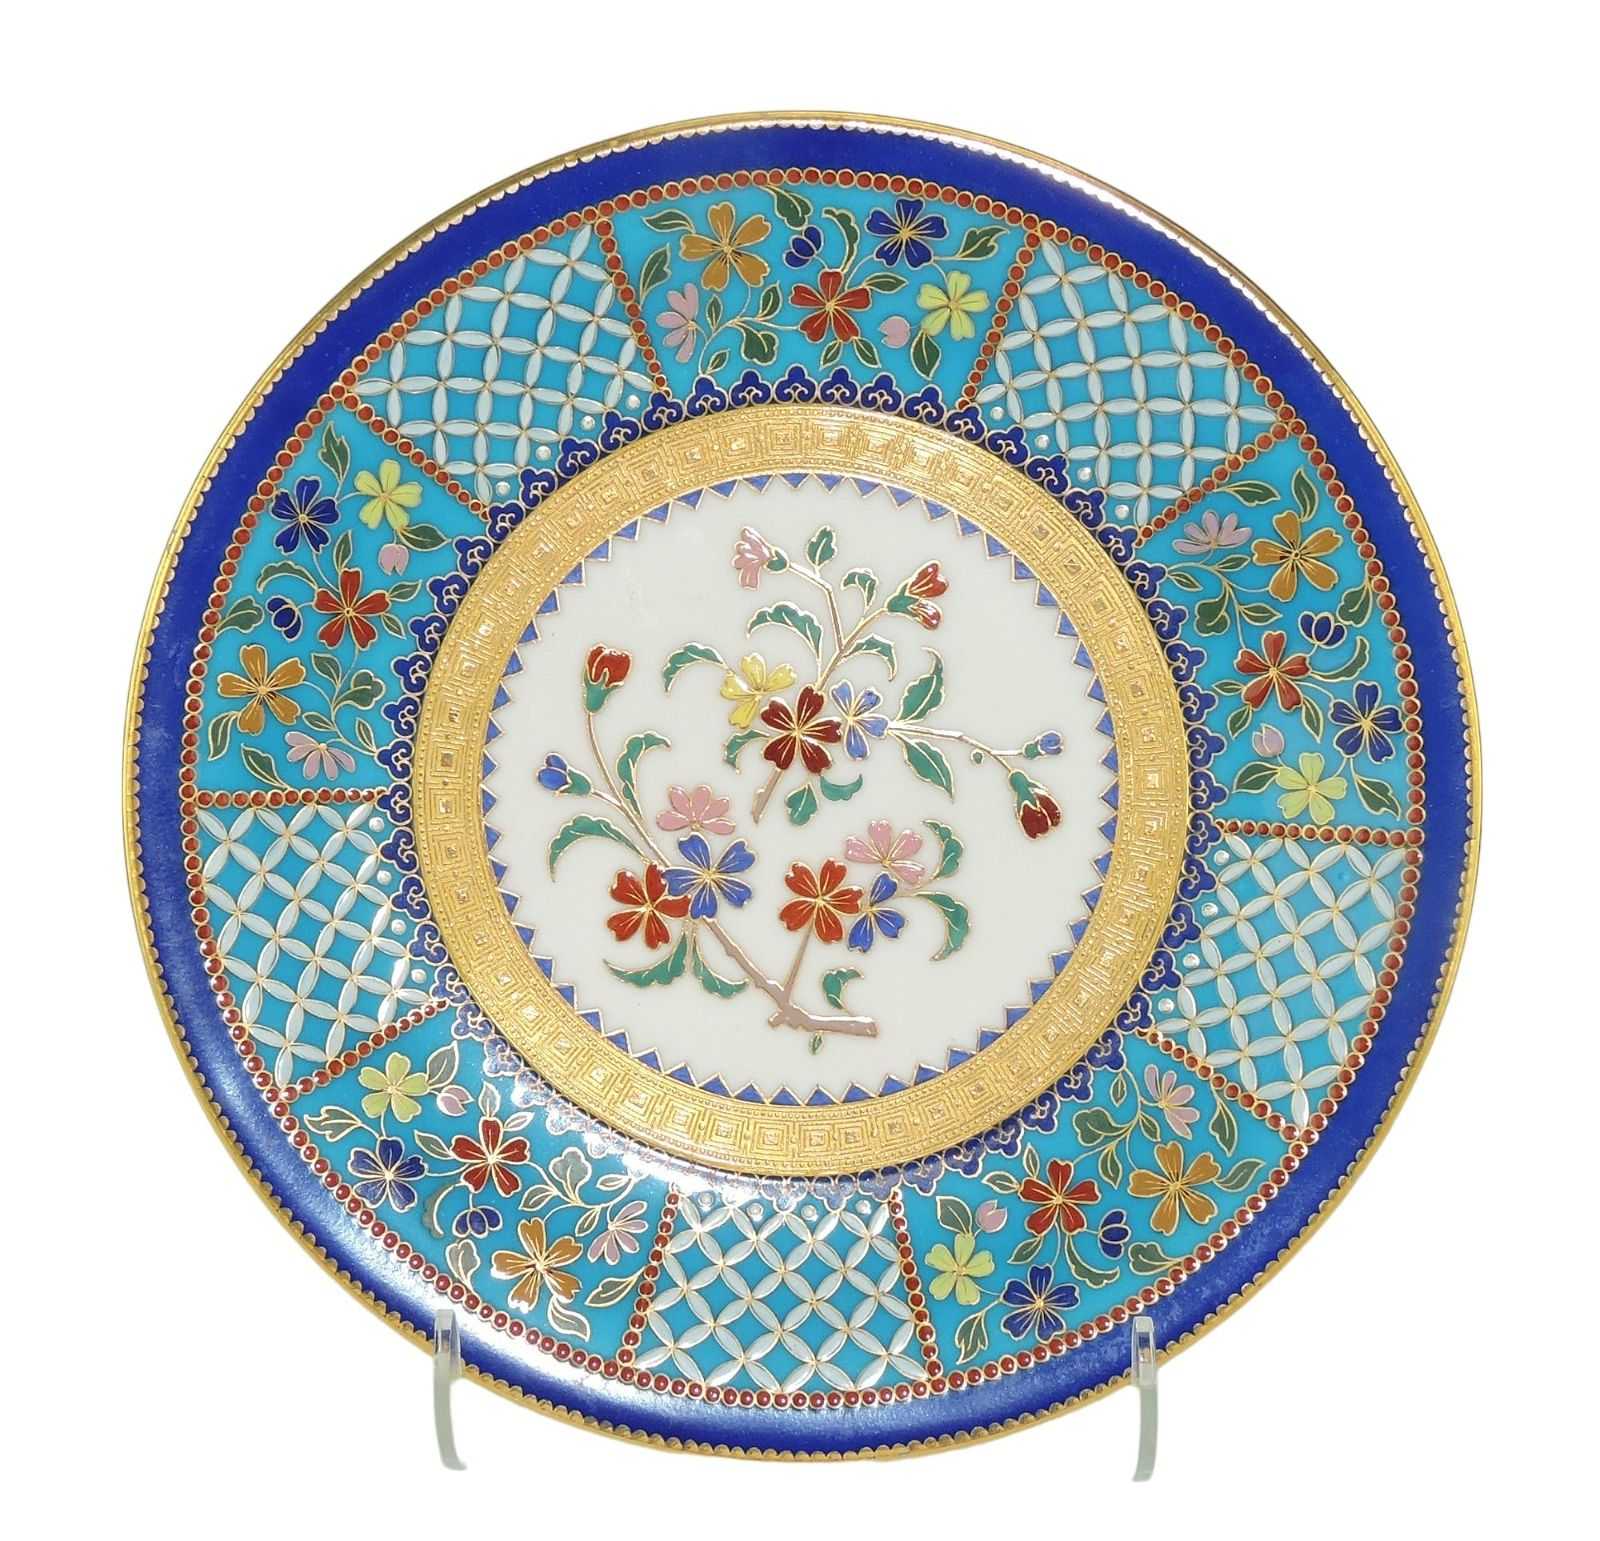 Circa-1875 Minton Aesthetic movement cabinet plate designed by Christopher Dresser, estimated at $800-$1,200 at Strawser Auction Group.